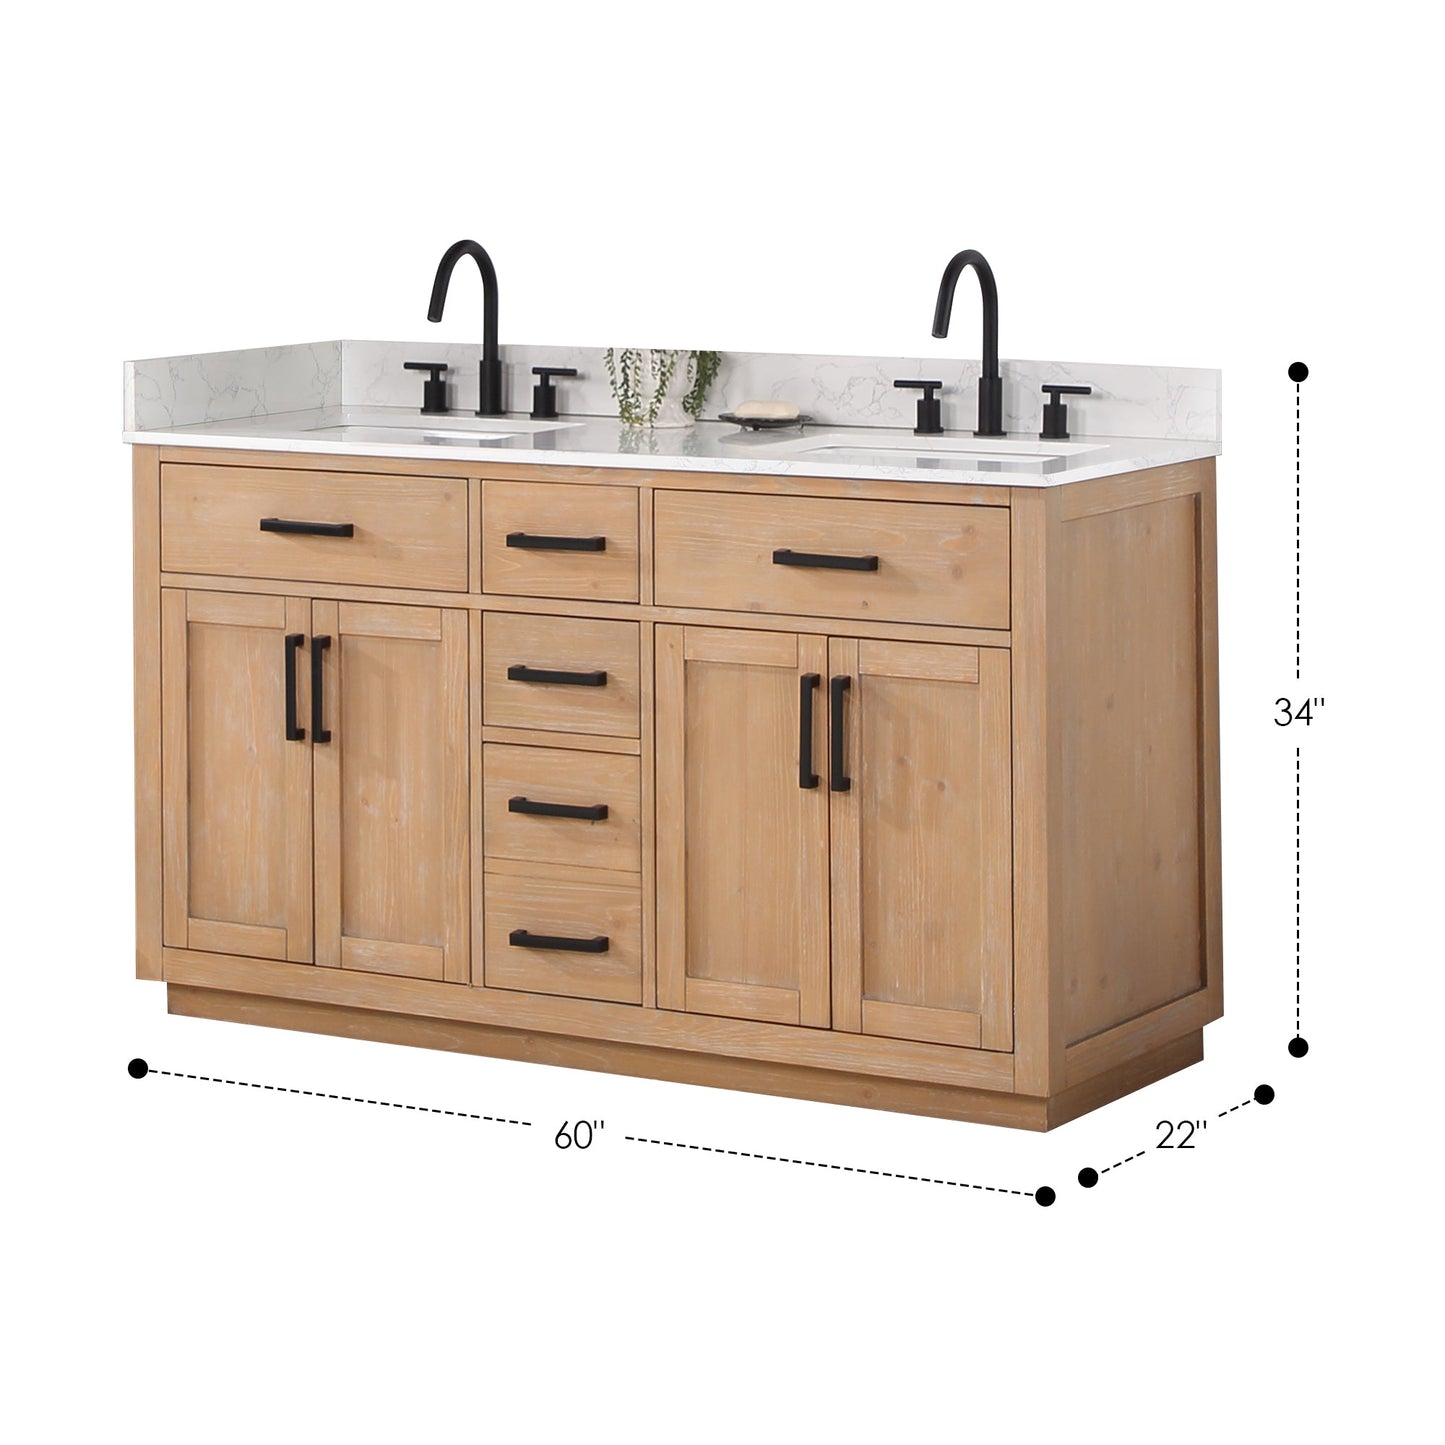 Gavino 60" Double Bathroom Vanity in Light Brown with Grain White Composite Stone Countertop without Mirror